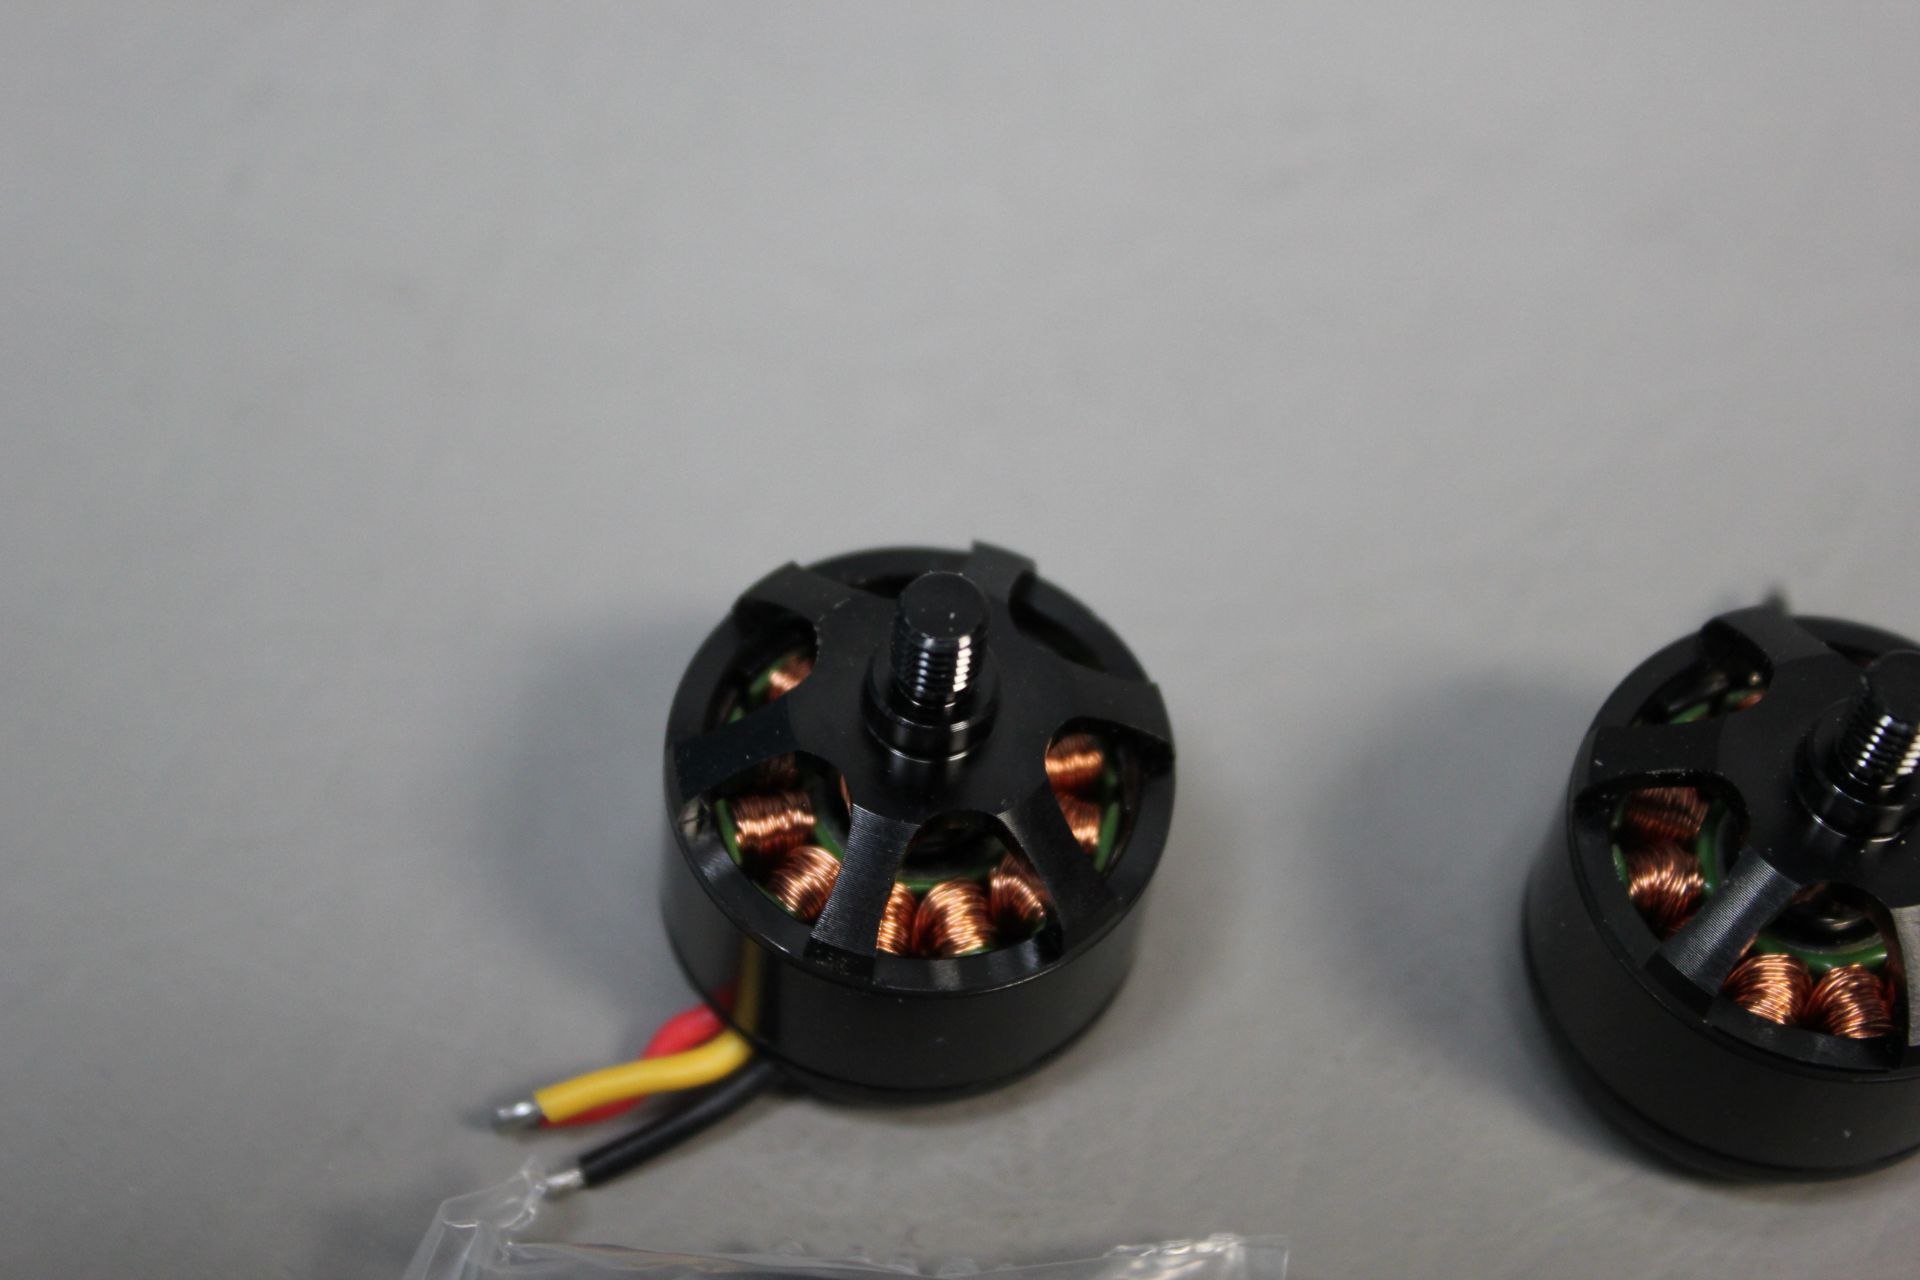 4 NEW T-MOTOR DRONE QUADCOPTER BRUSHLESS MOTORS & PROPELLERS - Image 4 of 12